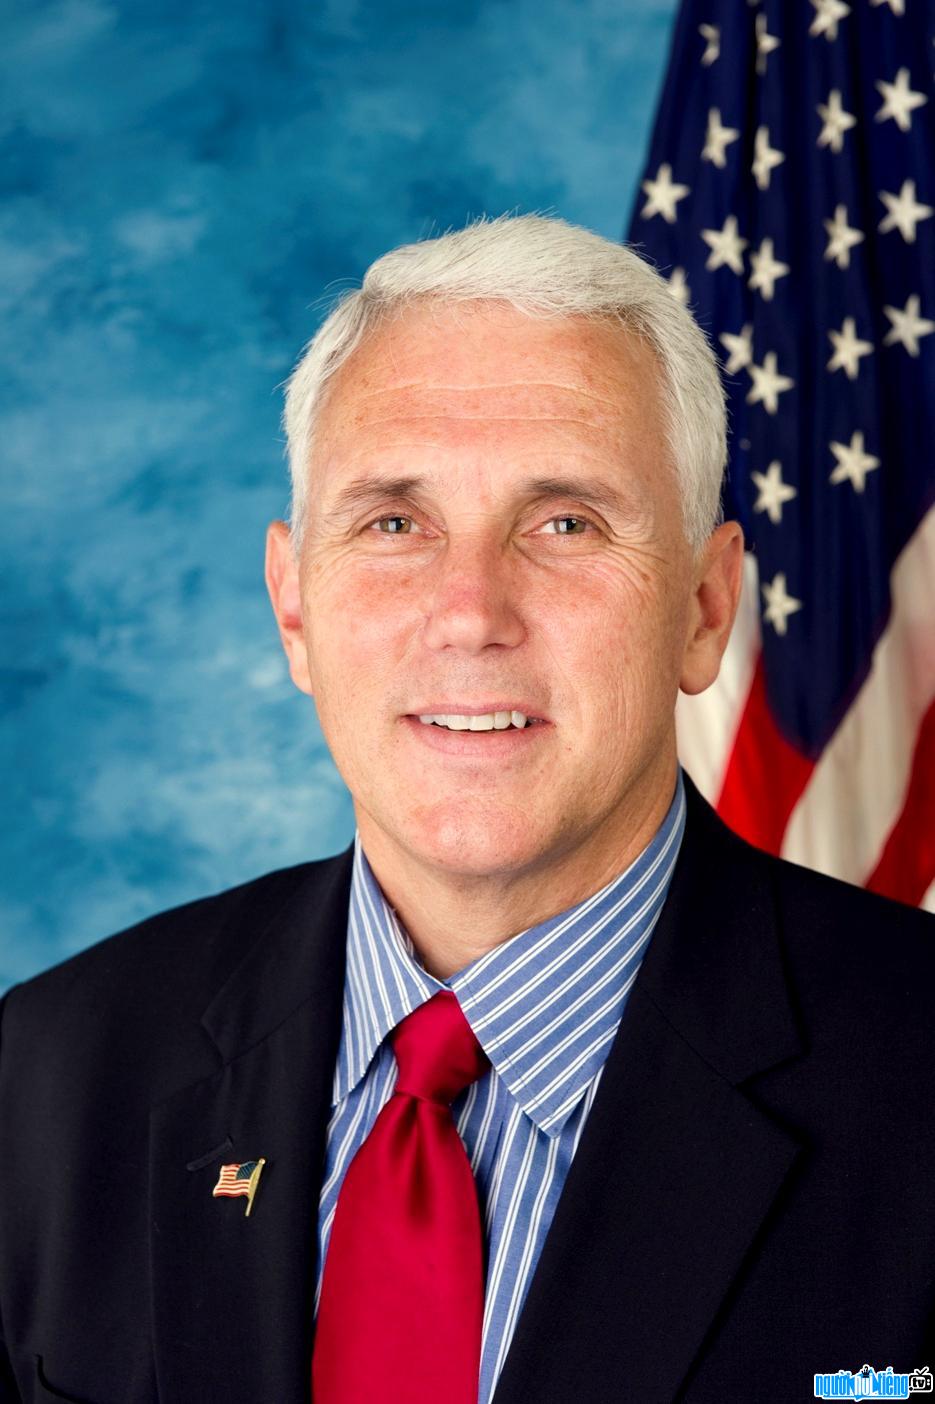 Indian Politician Mike Pence's Portraits